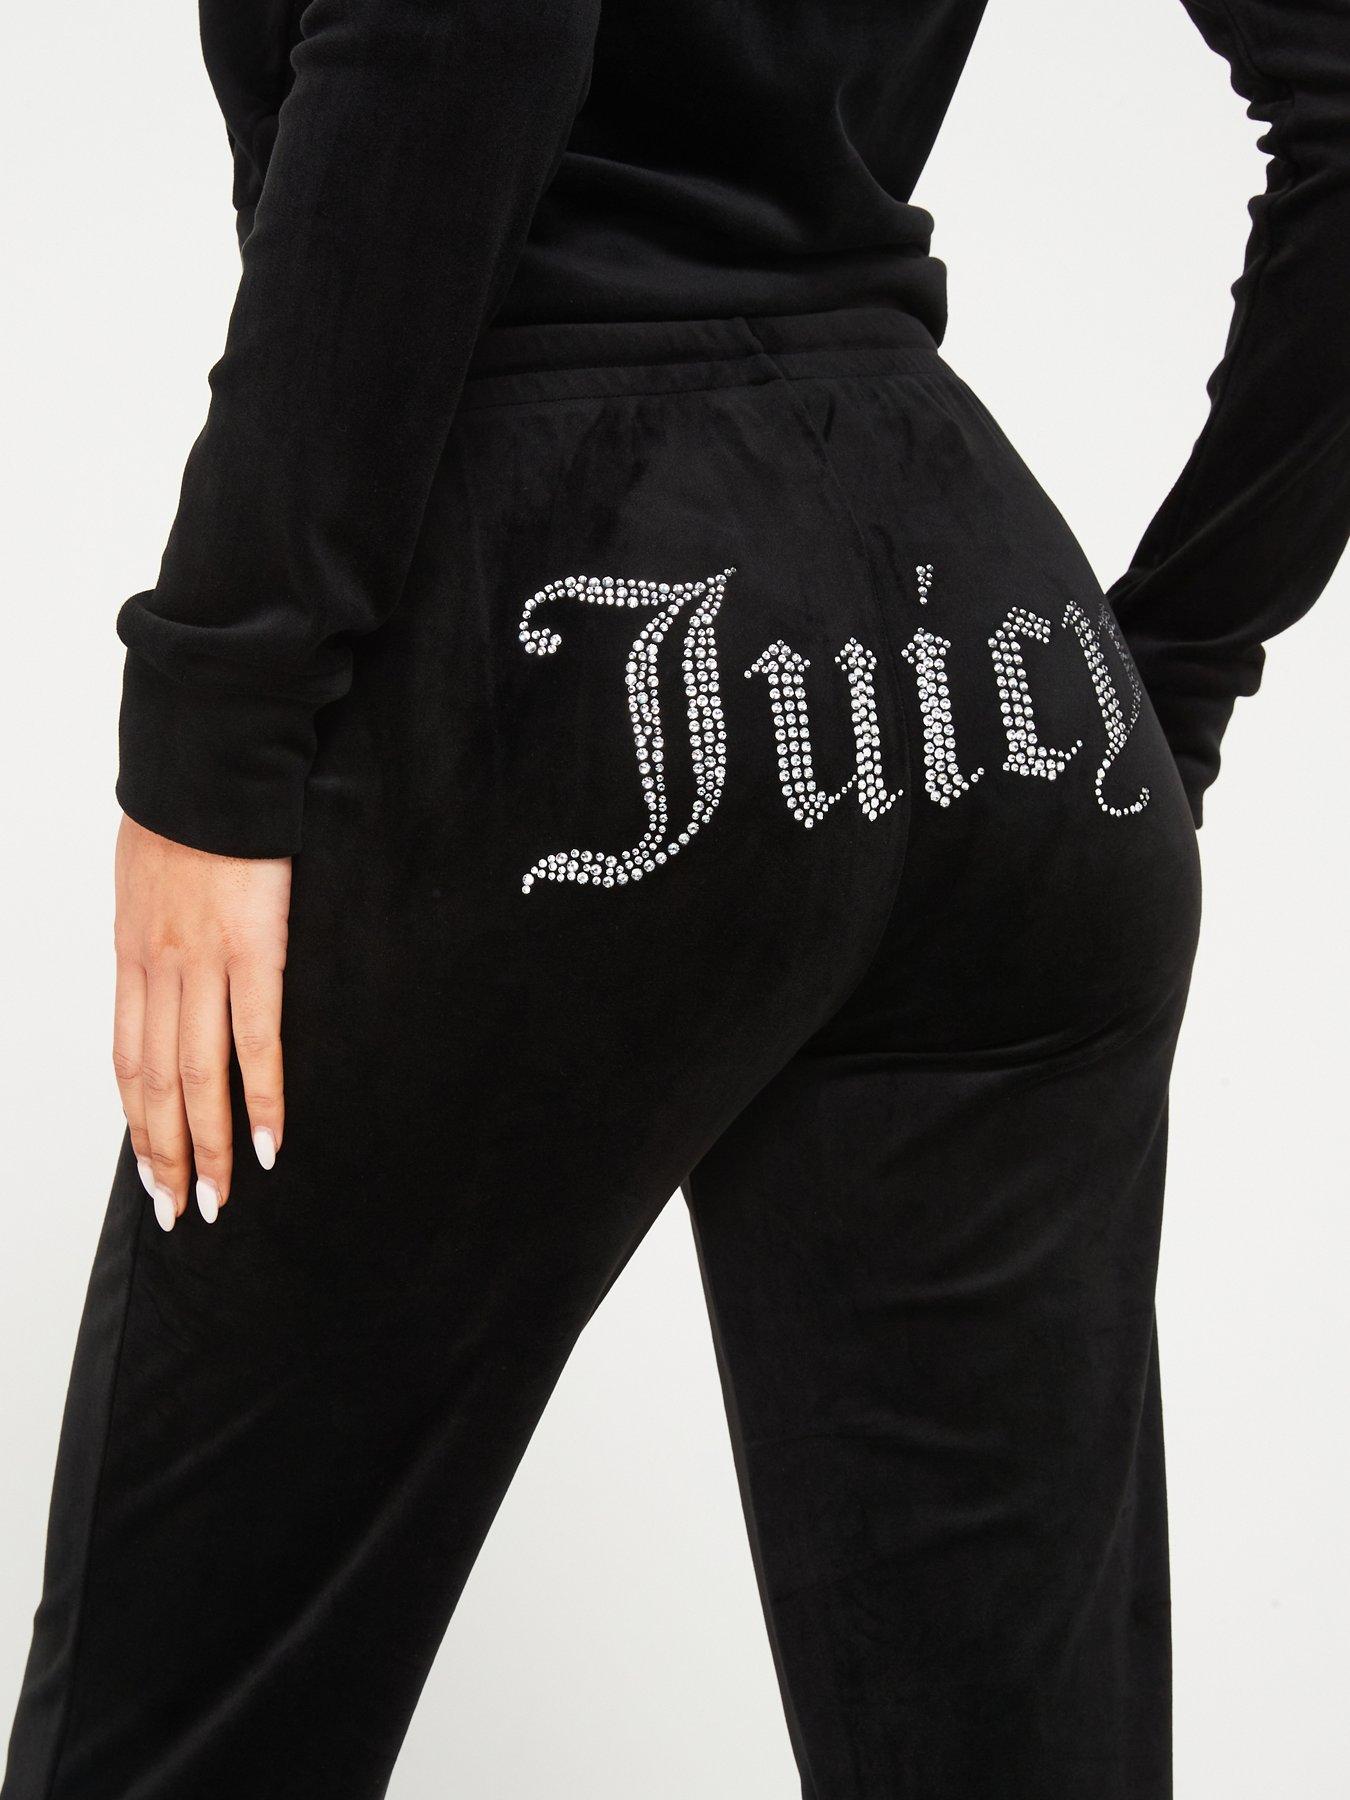 PALE PINK LOW RISE FLARE CLASSIC VELOUR TRACK PANT – Juicy Couture UK